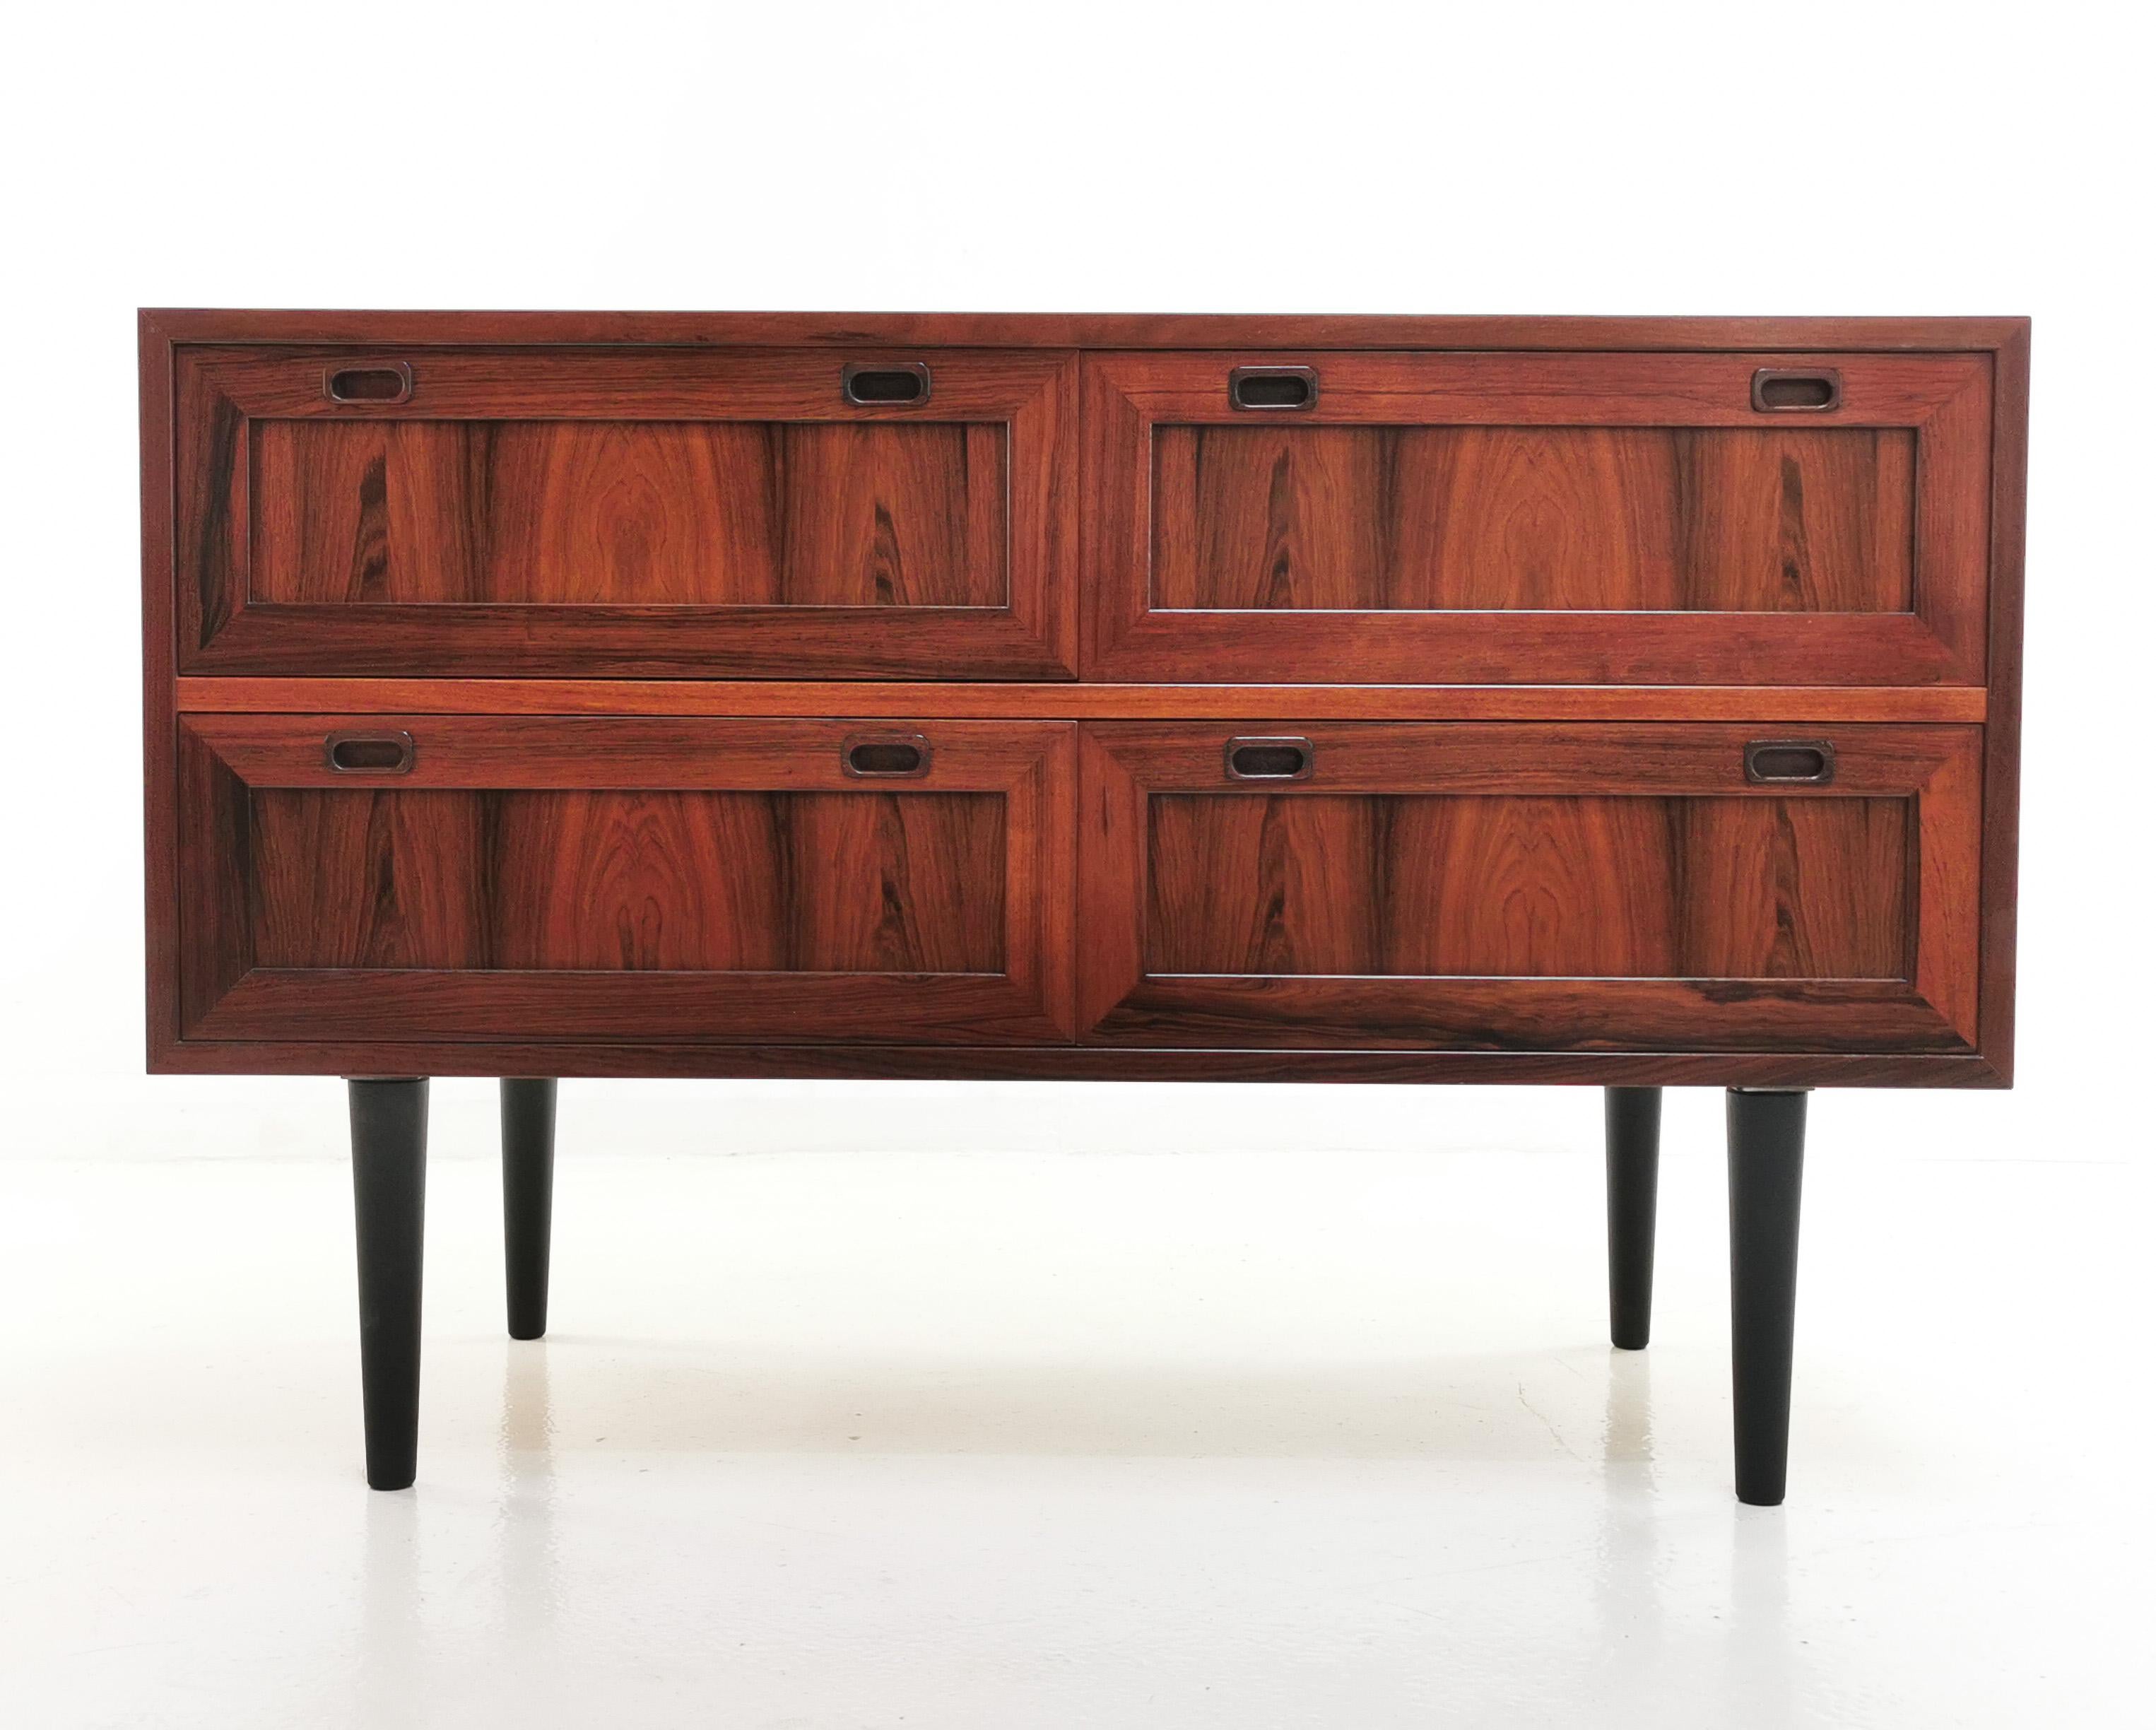 Danish rosewood sideboard

High-quality Danish rosewood sideboard from the 1970s and manufactured by Sejling Skabe.

Featuring two cupboard doors with recessed door pulls, and internal shelving. 

We have raised the unit on solid timber